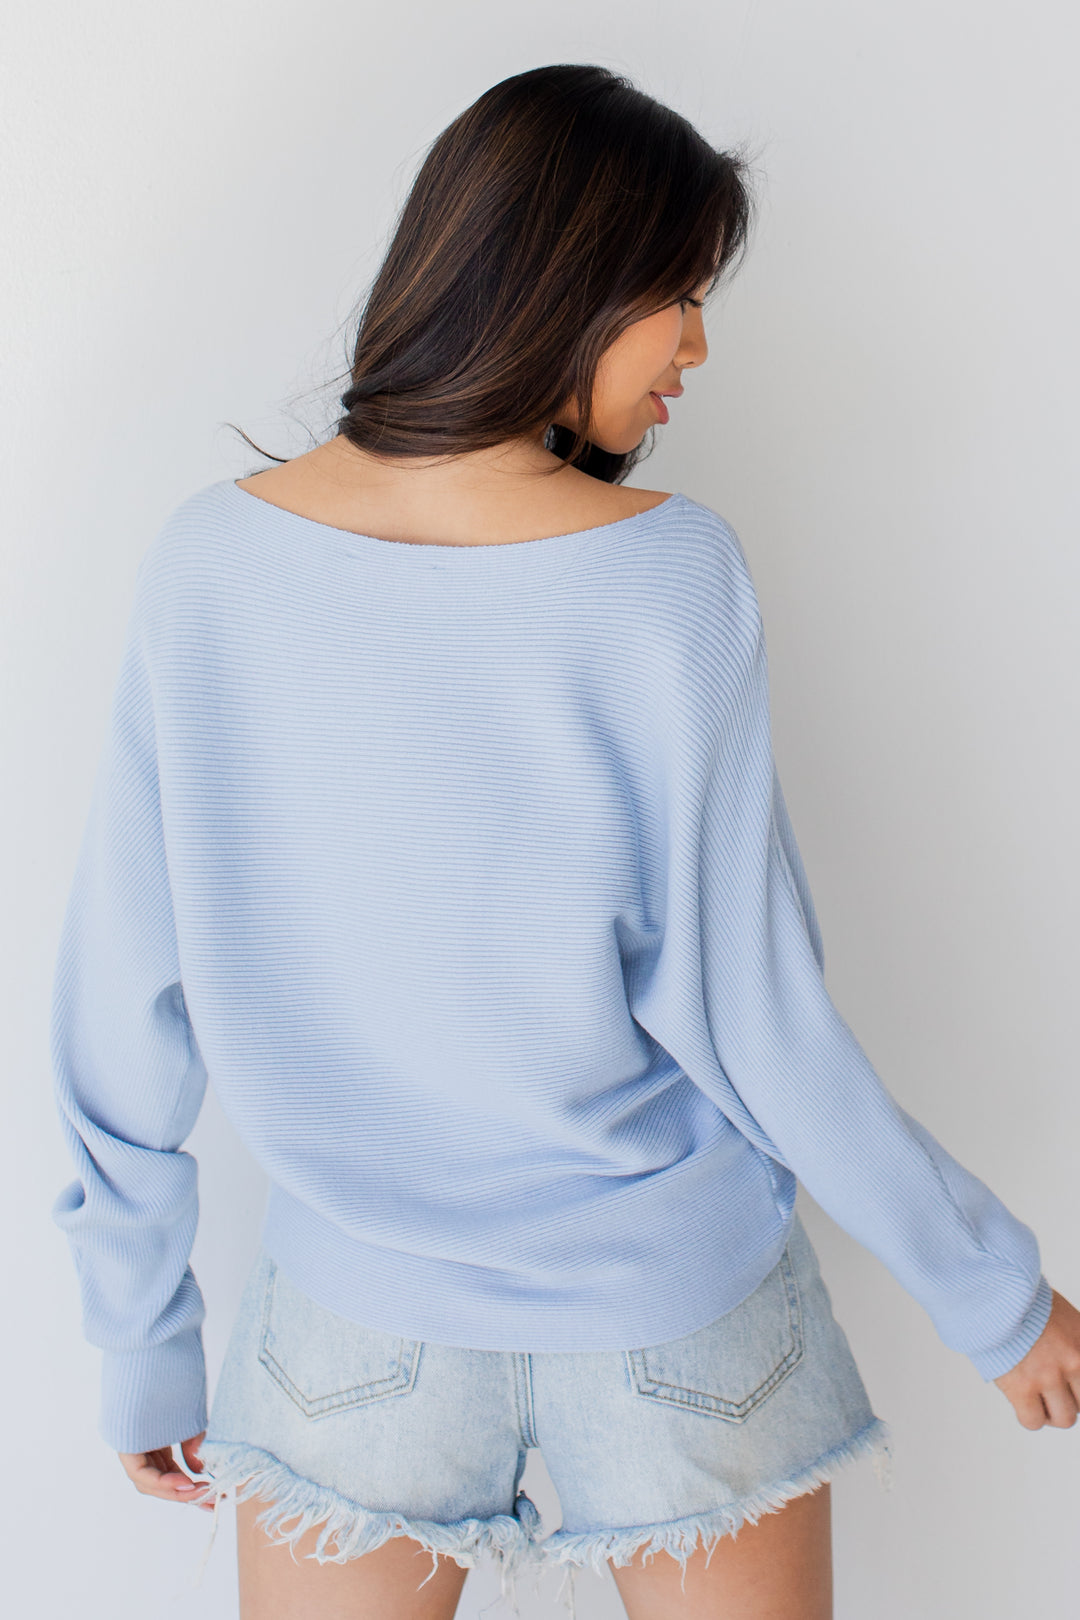 Ribbed Sweater in light blue back view